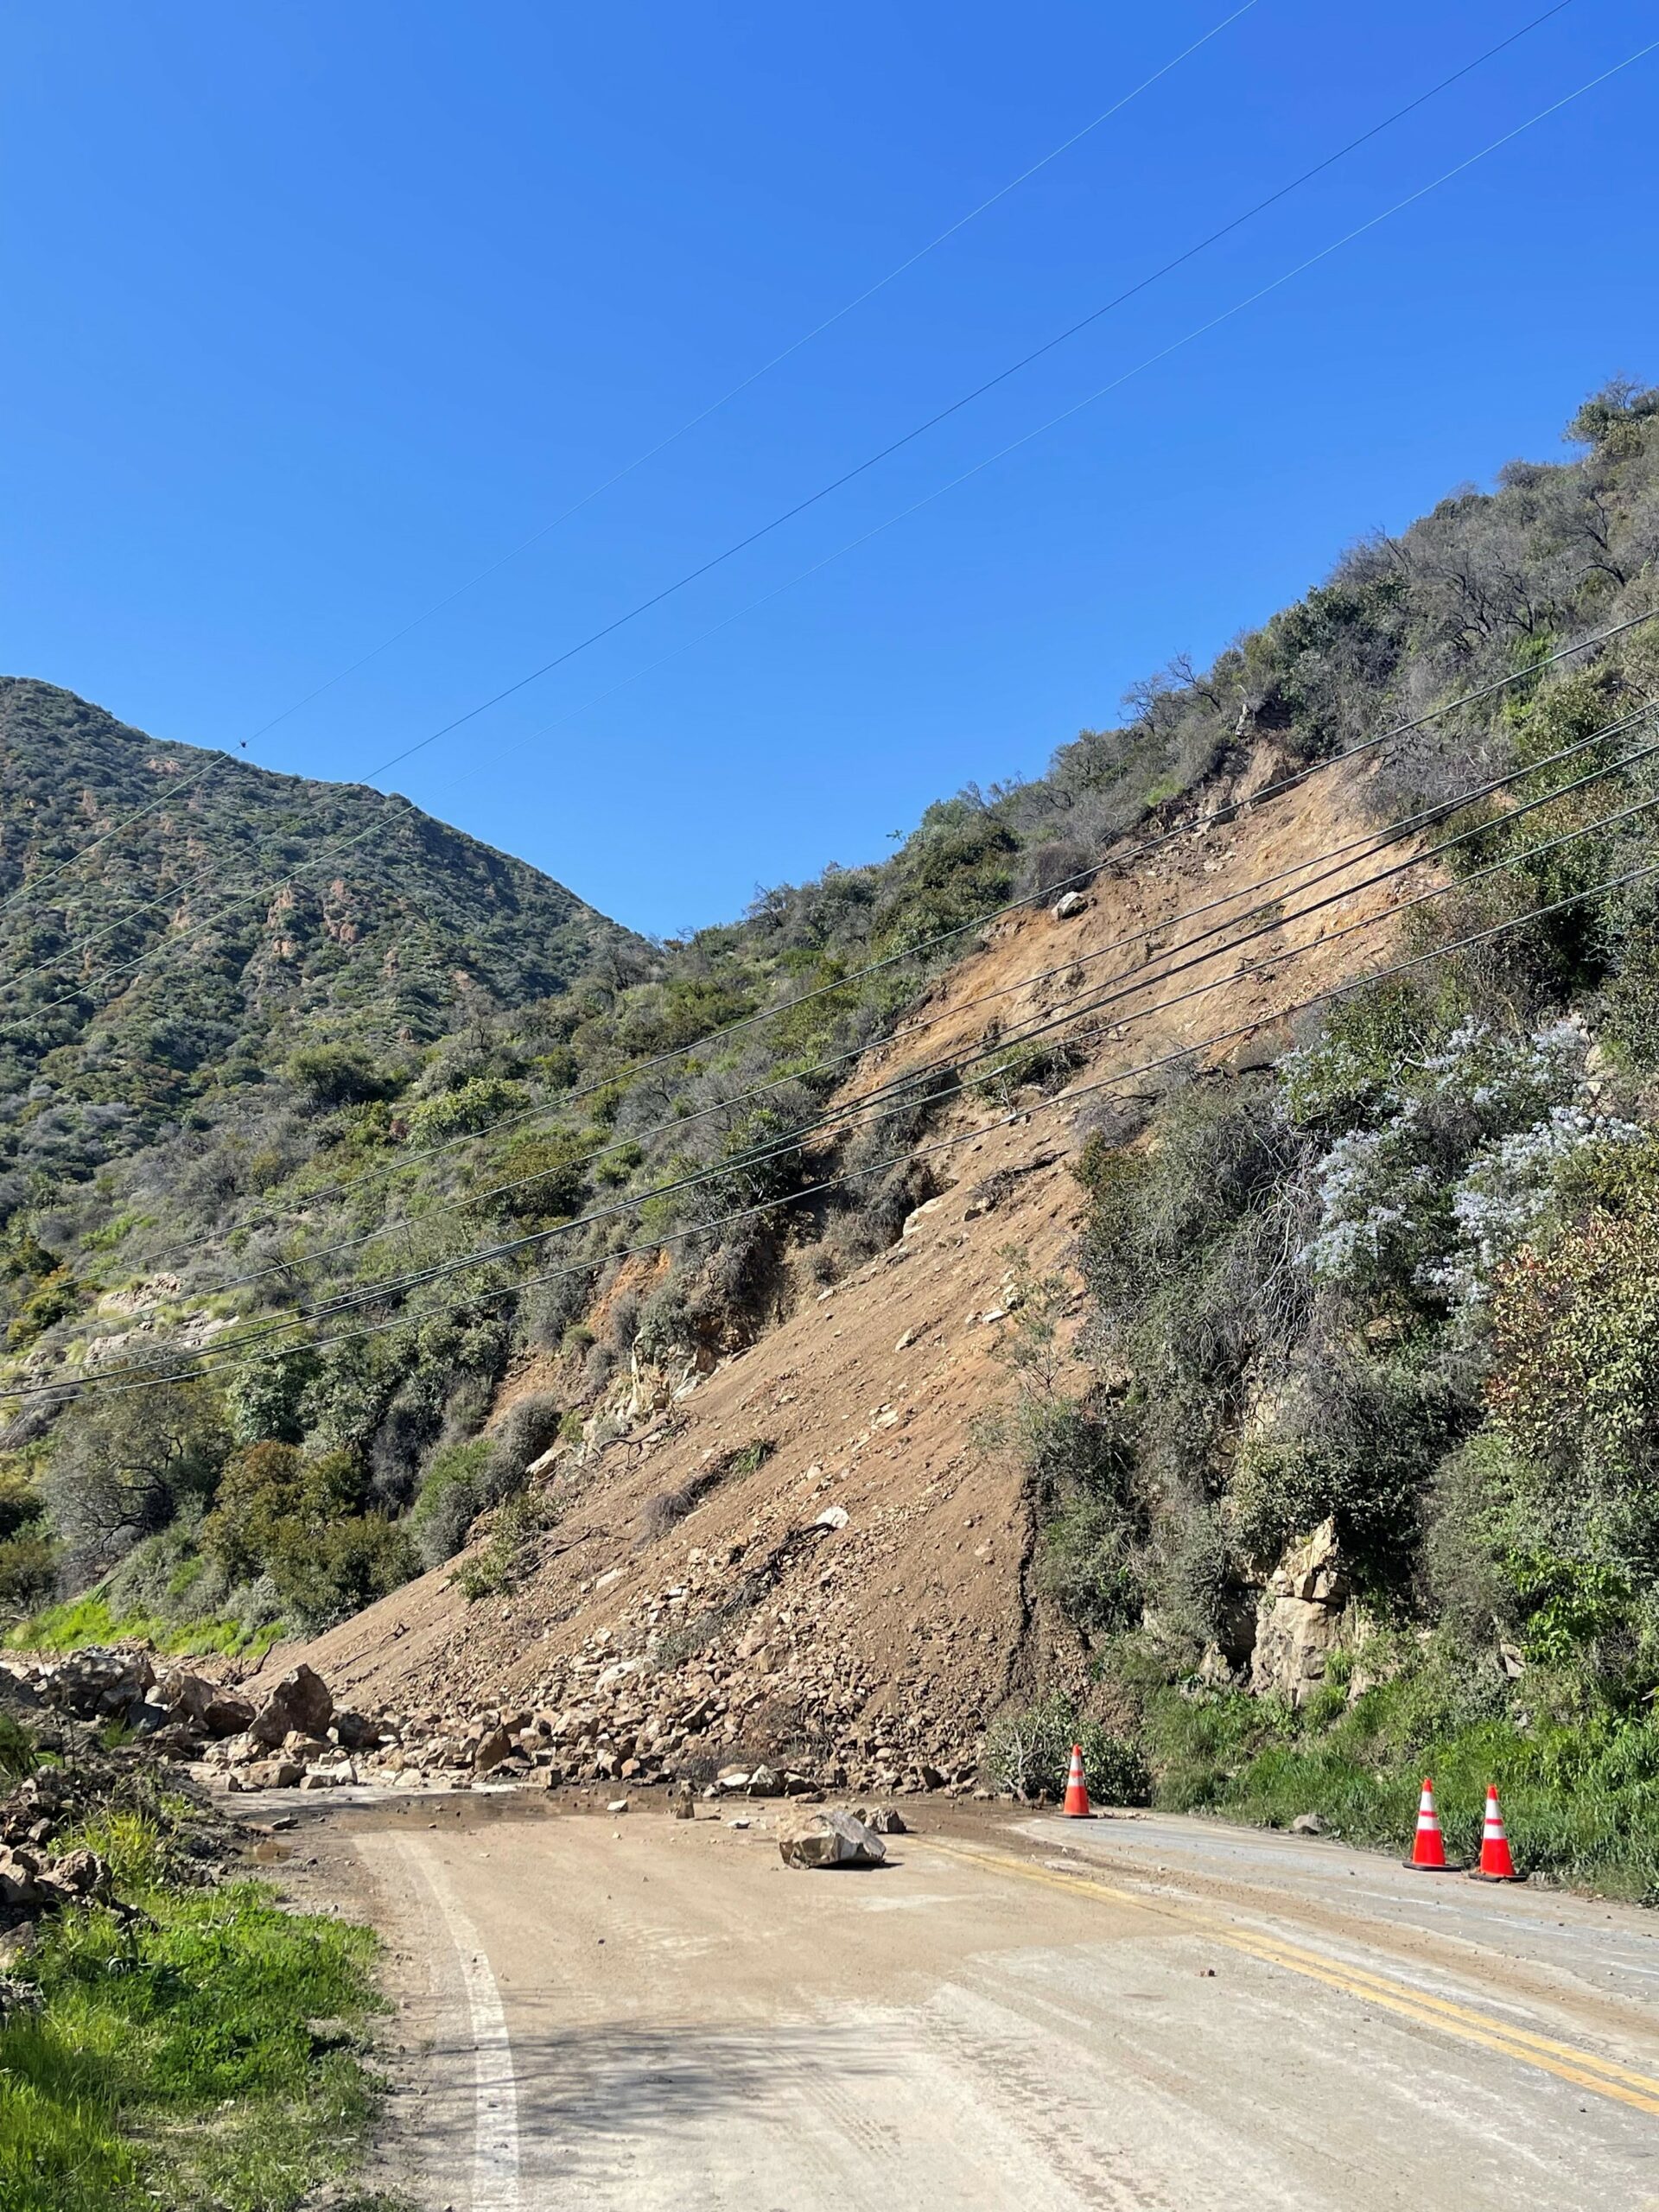 One lane open after rockslide shuts down Pacific Coast Highway in